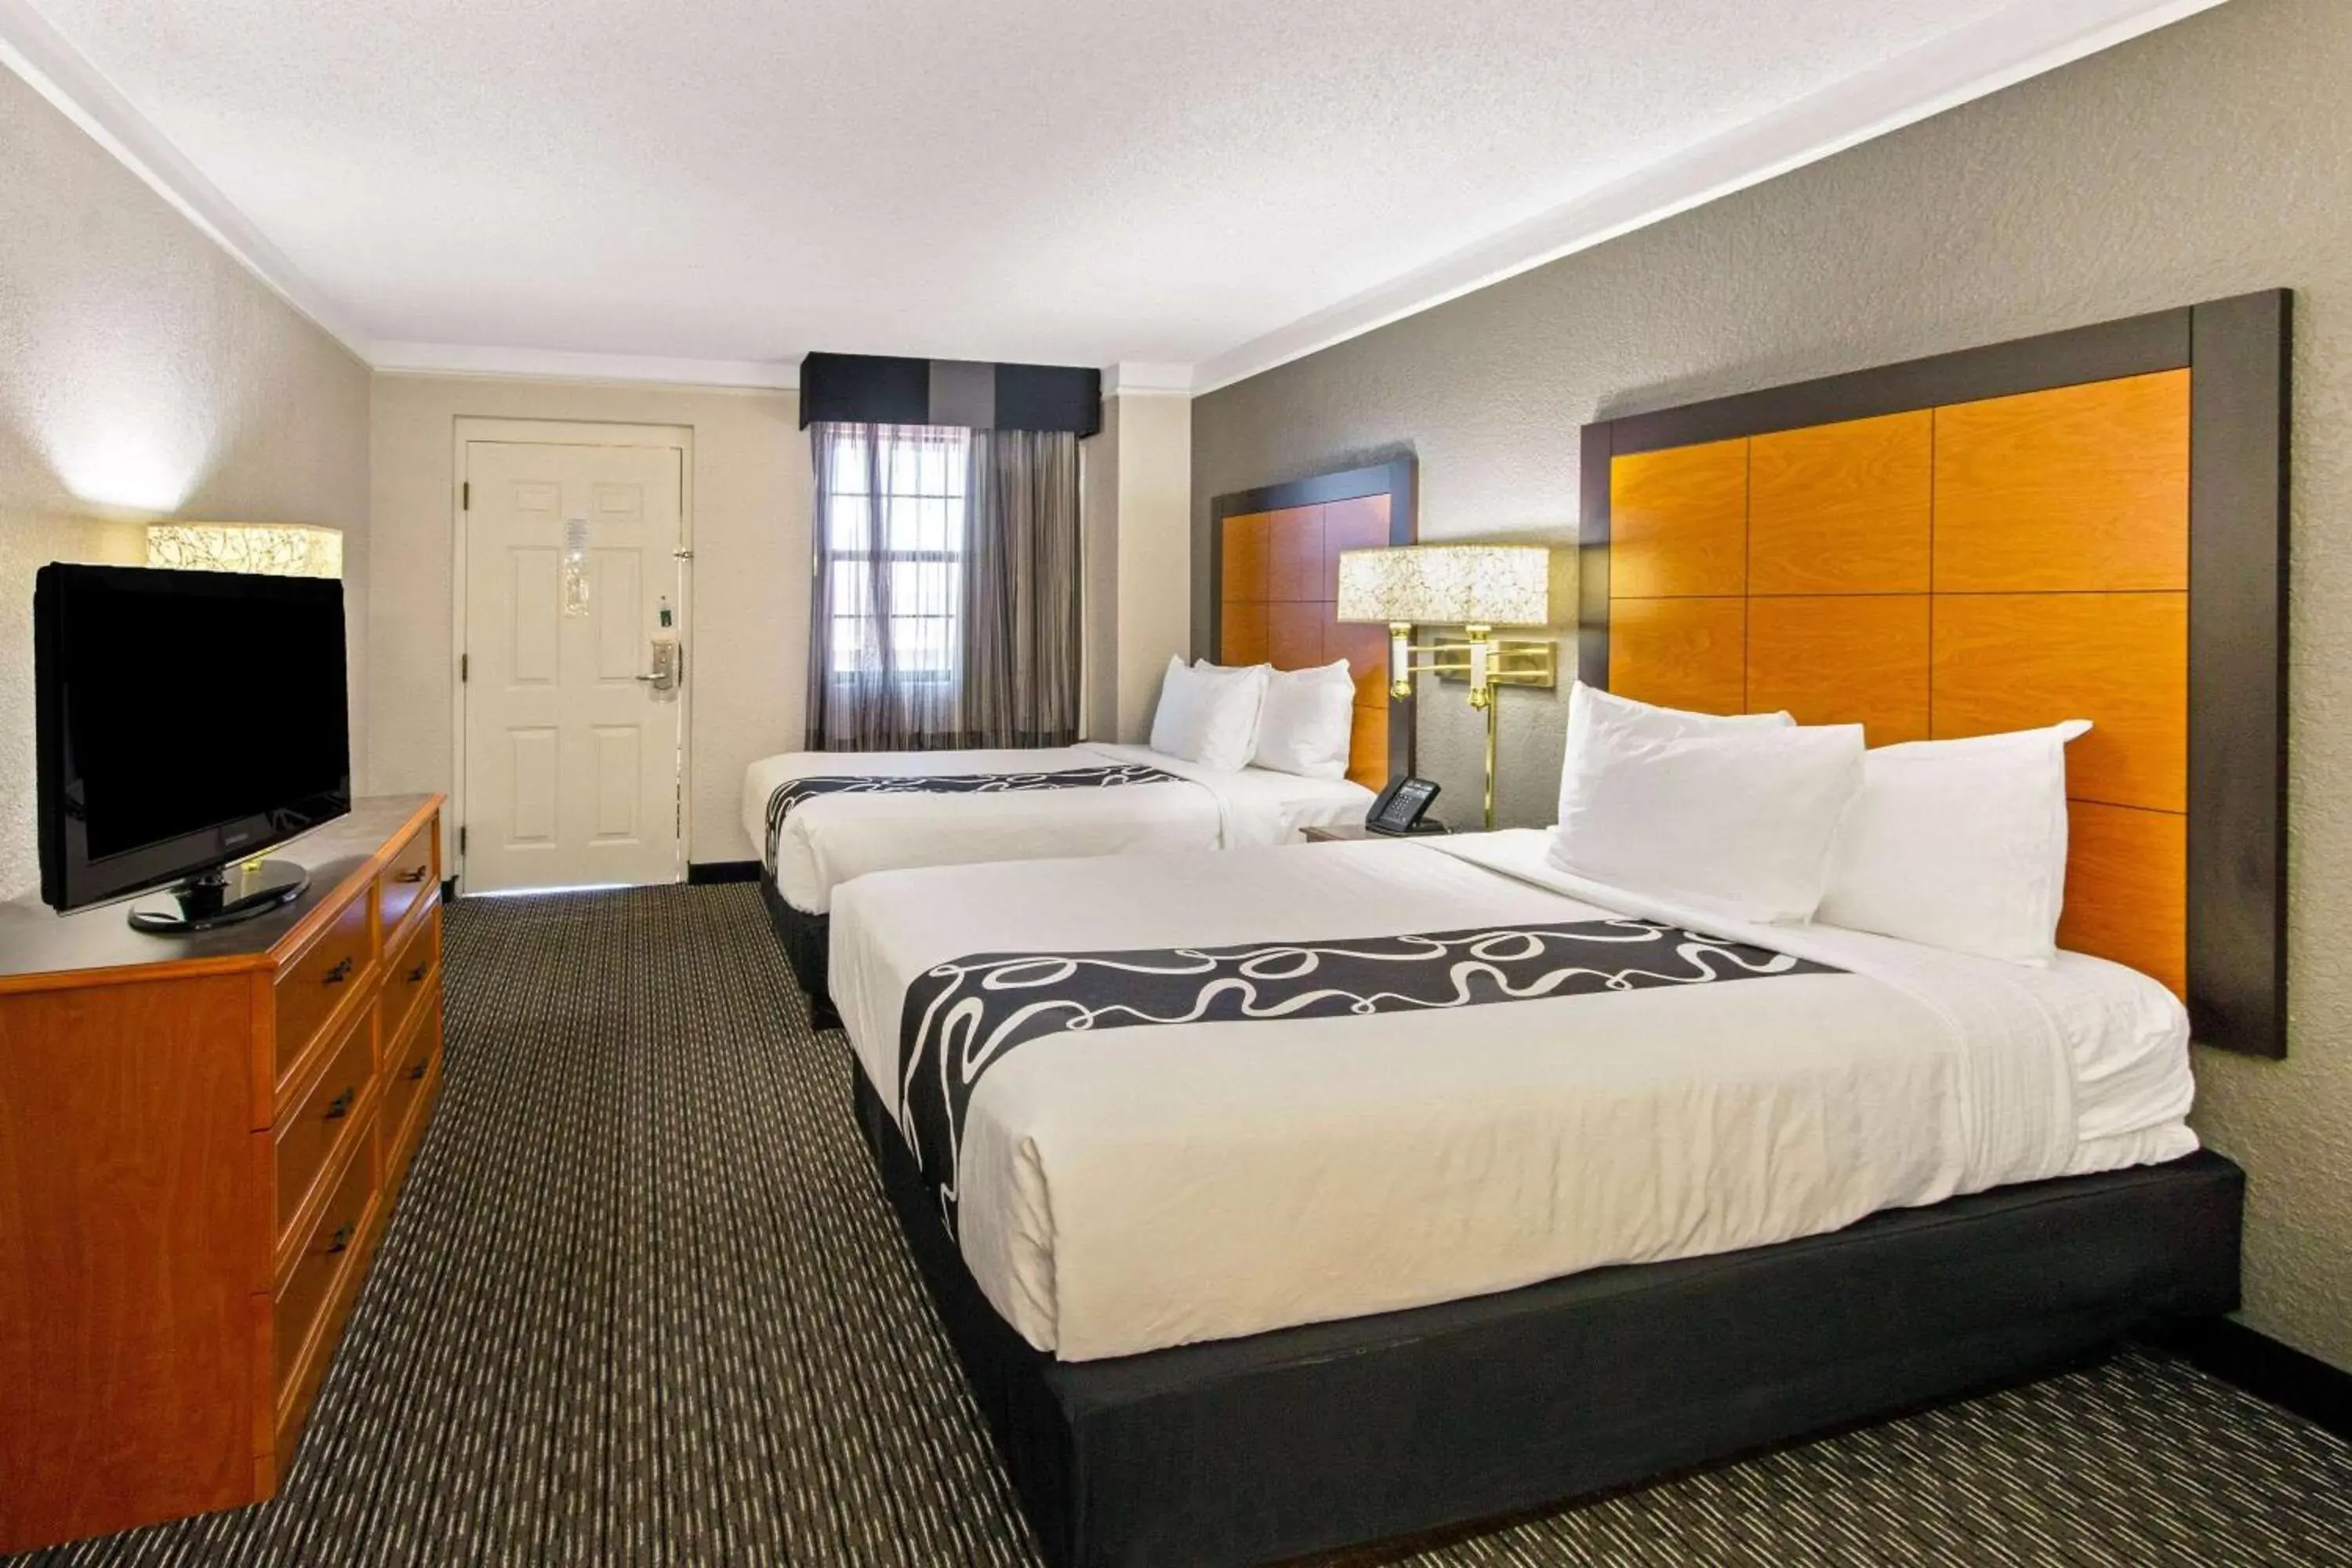 Double Room with Two Double Beds in La Quinta Inn by Wyndham Santa Fe